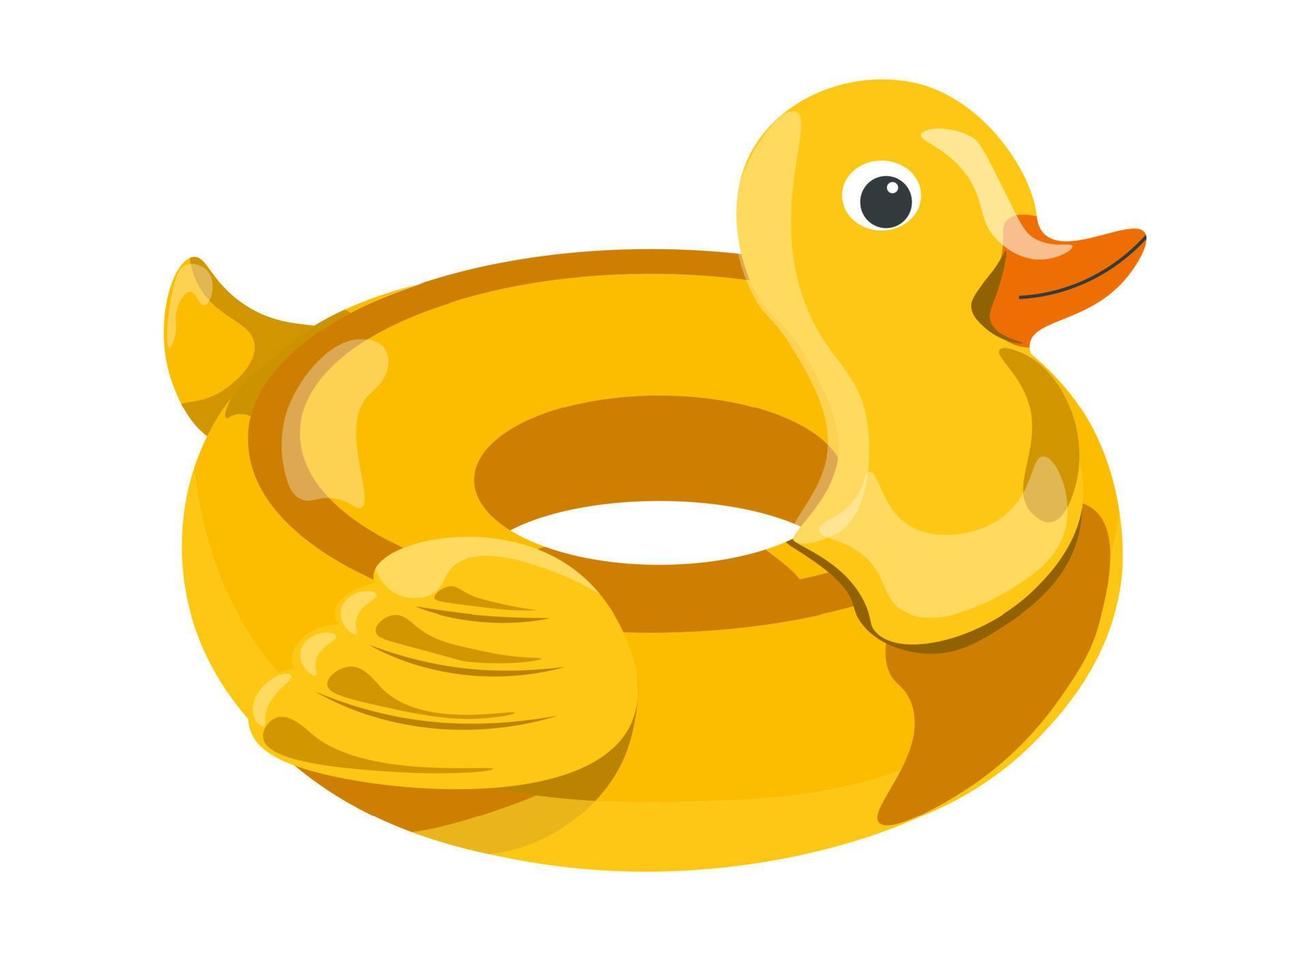 Inflatable balloon or lifebuoy in shape of duck vector